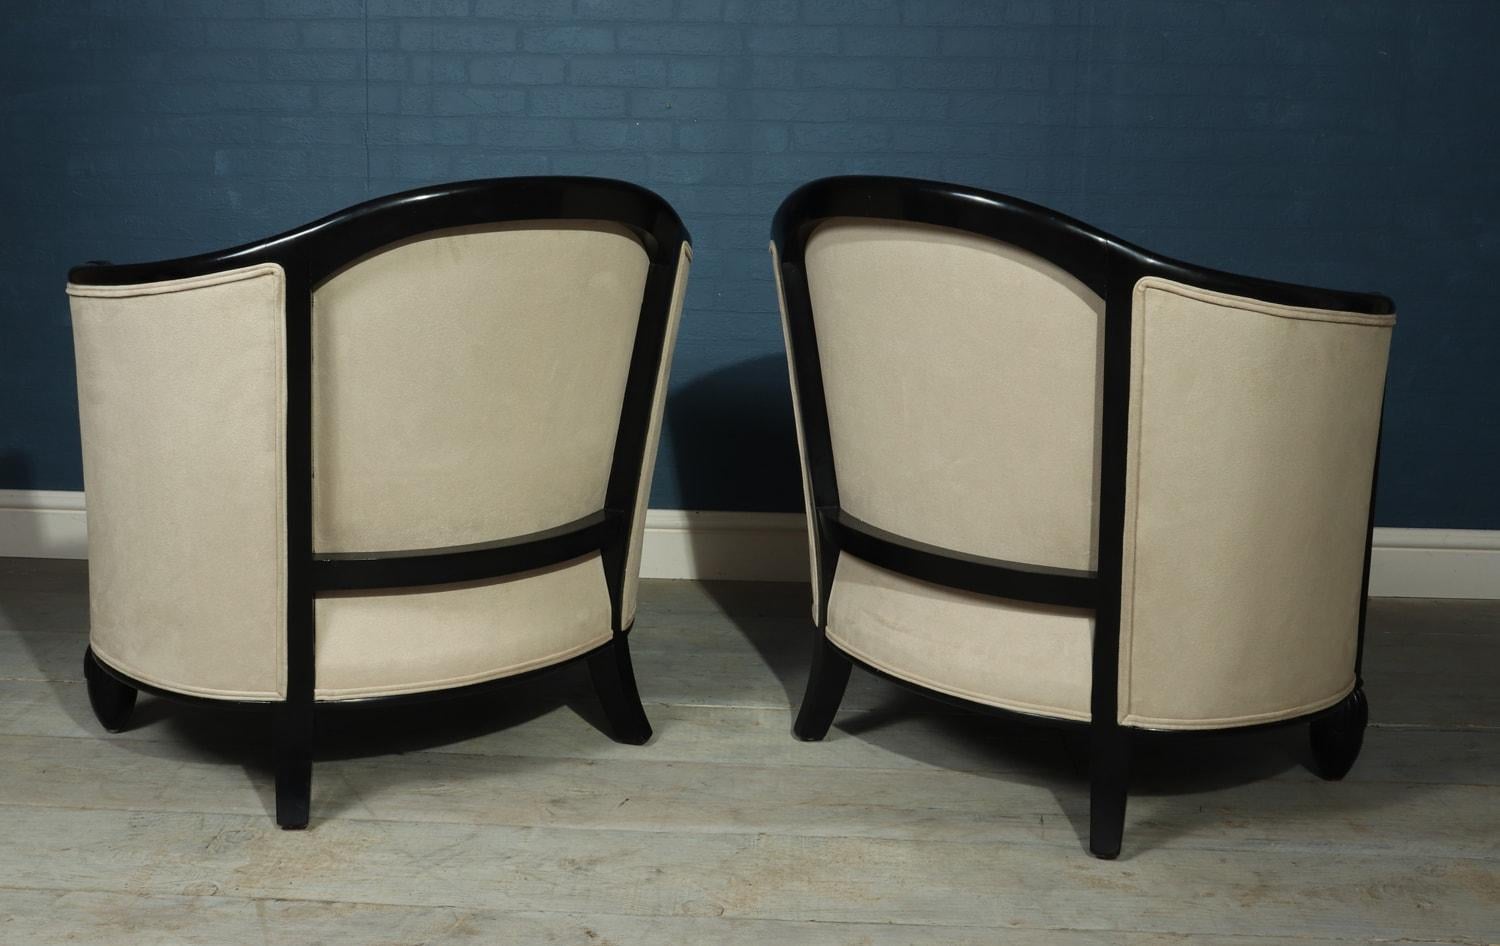 French Art Deco Chairs and Sofa by Paul Follot, circa 1920 For Sale 7